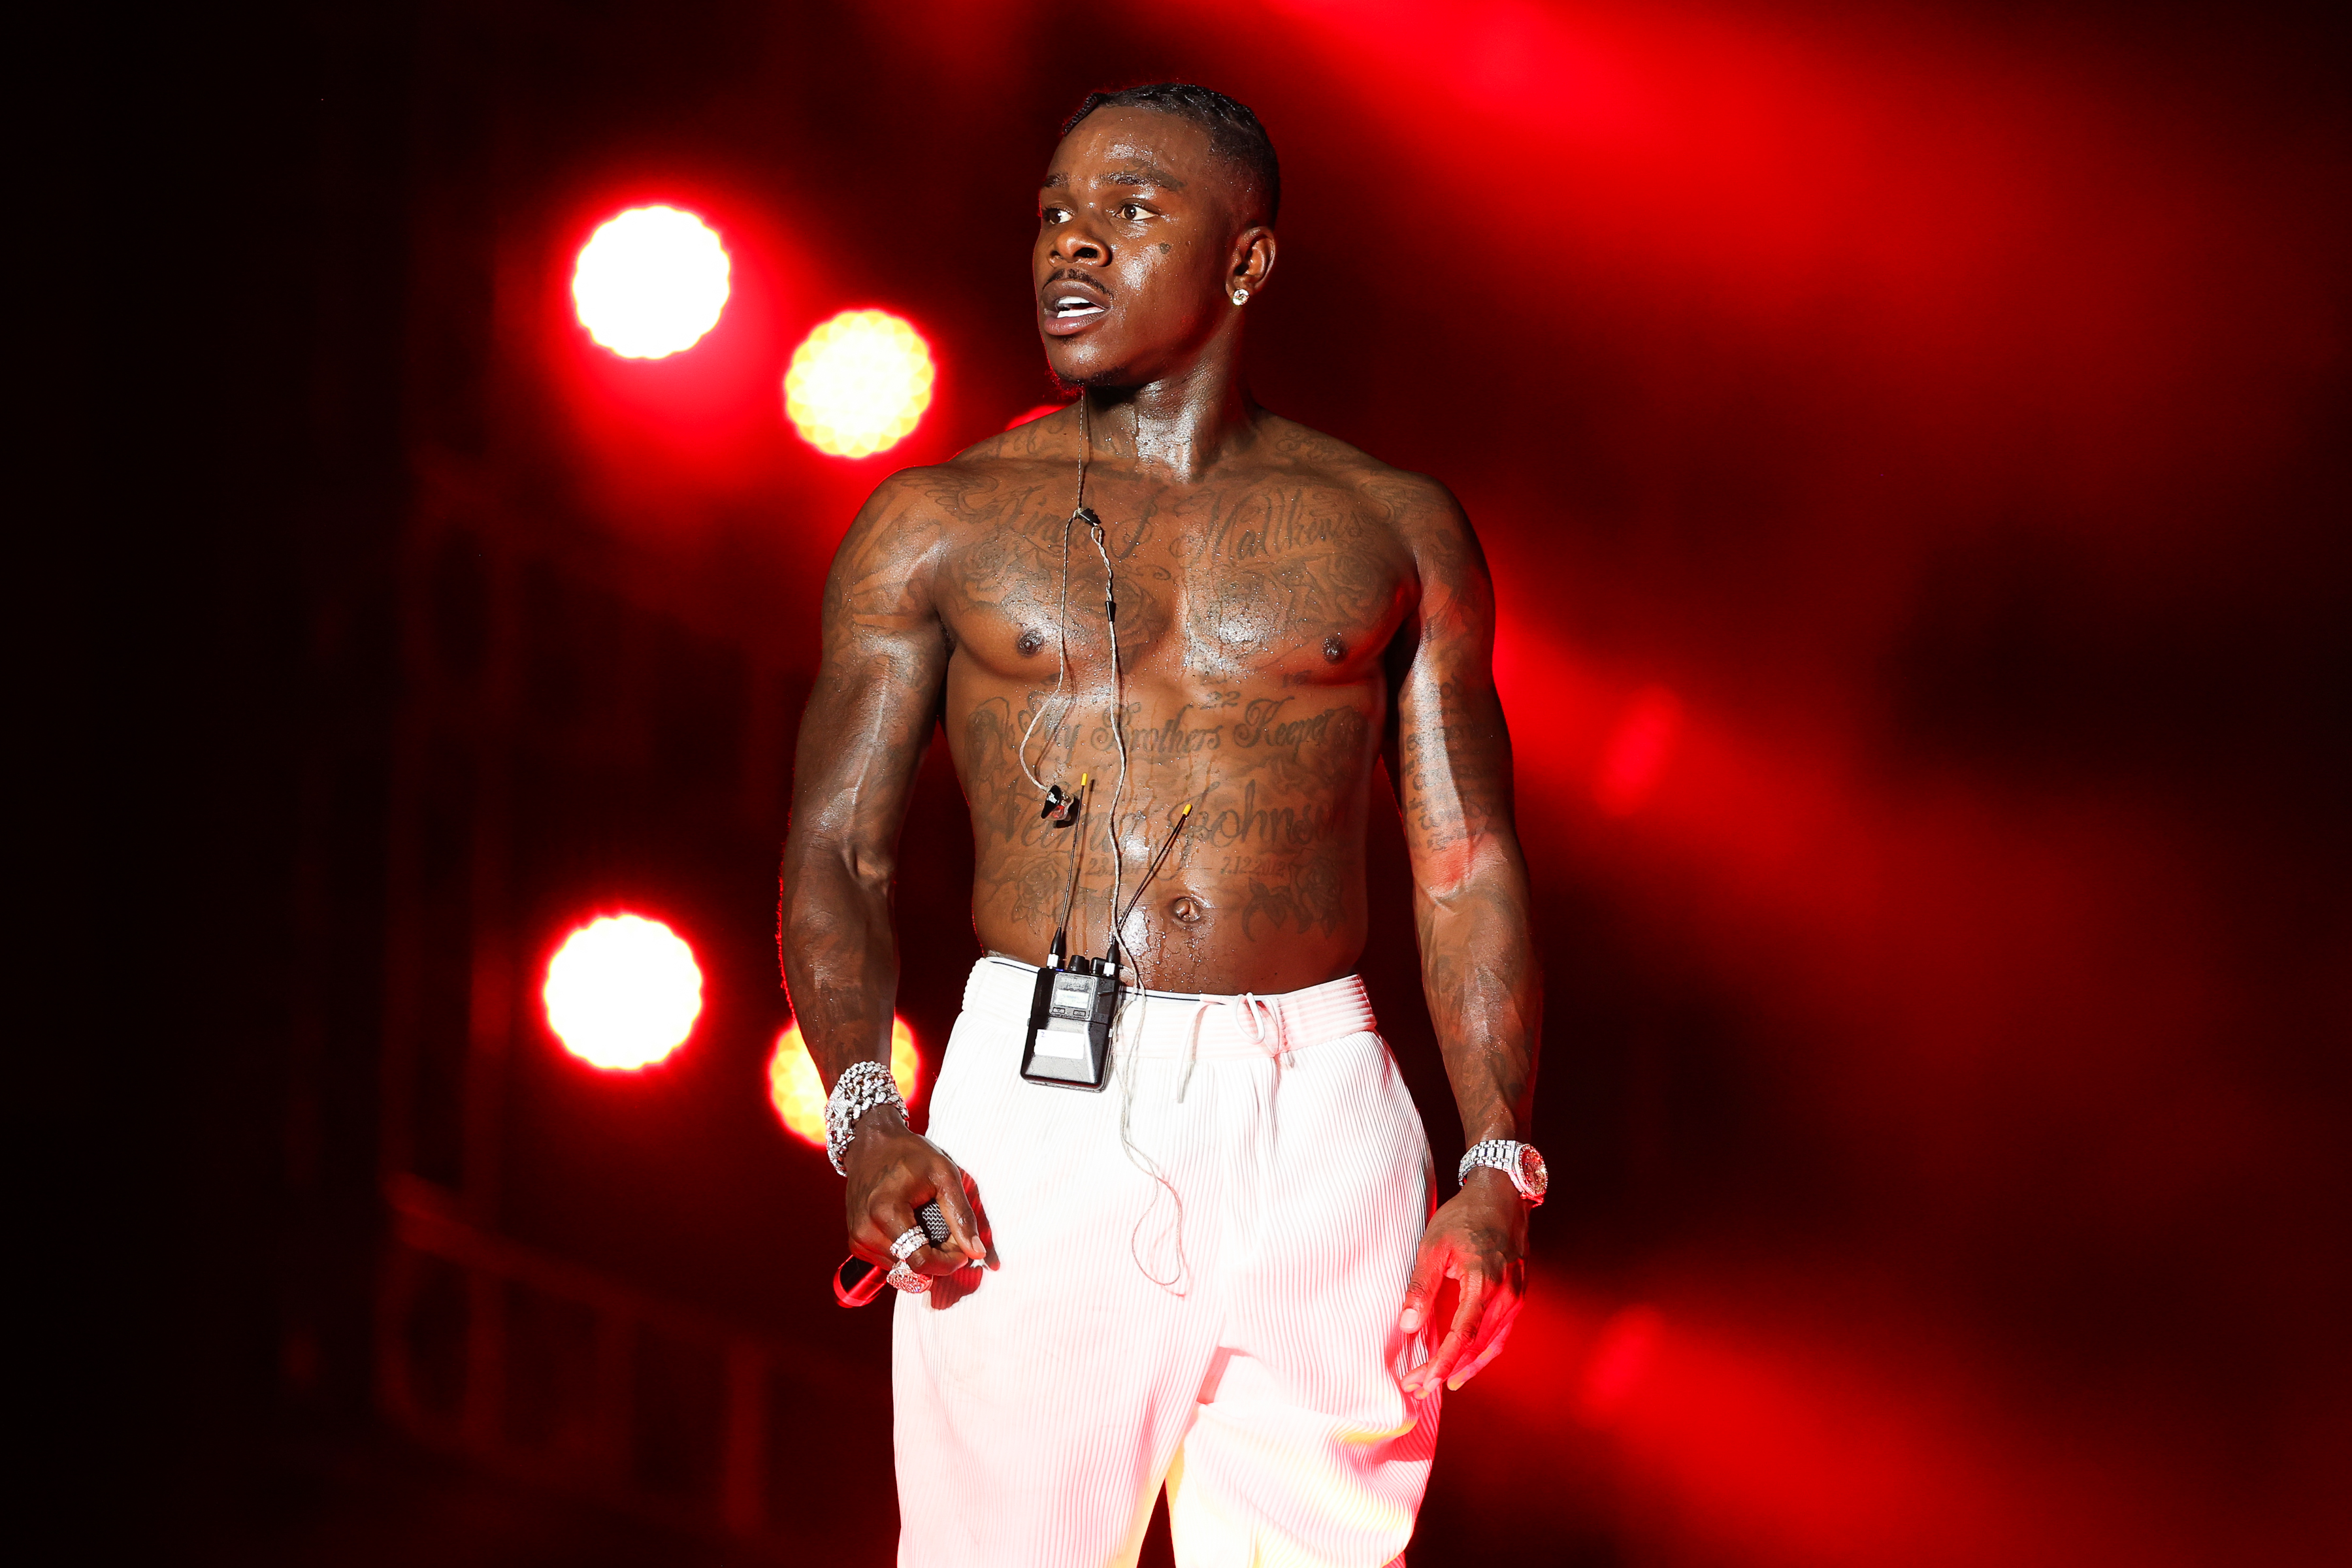 DaBaby Appears To Push Back After BOGO Tickets Go Viral